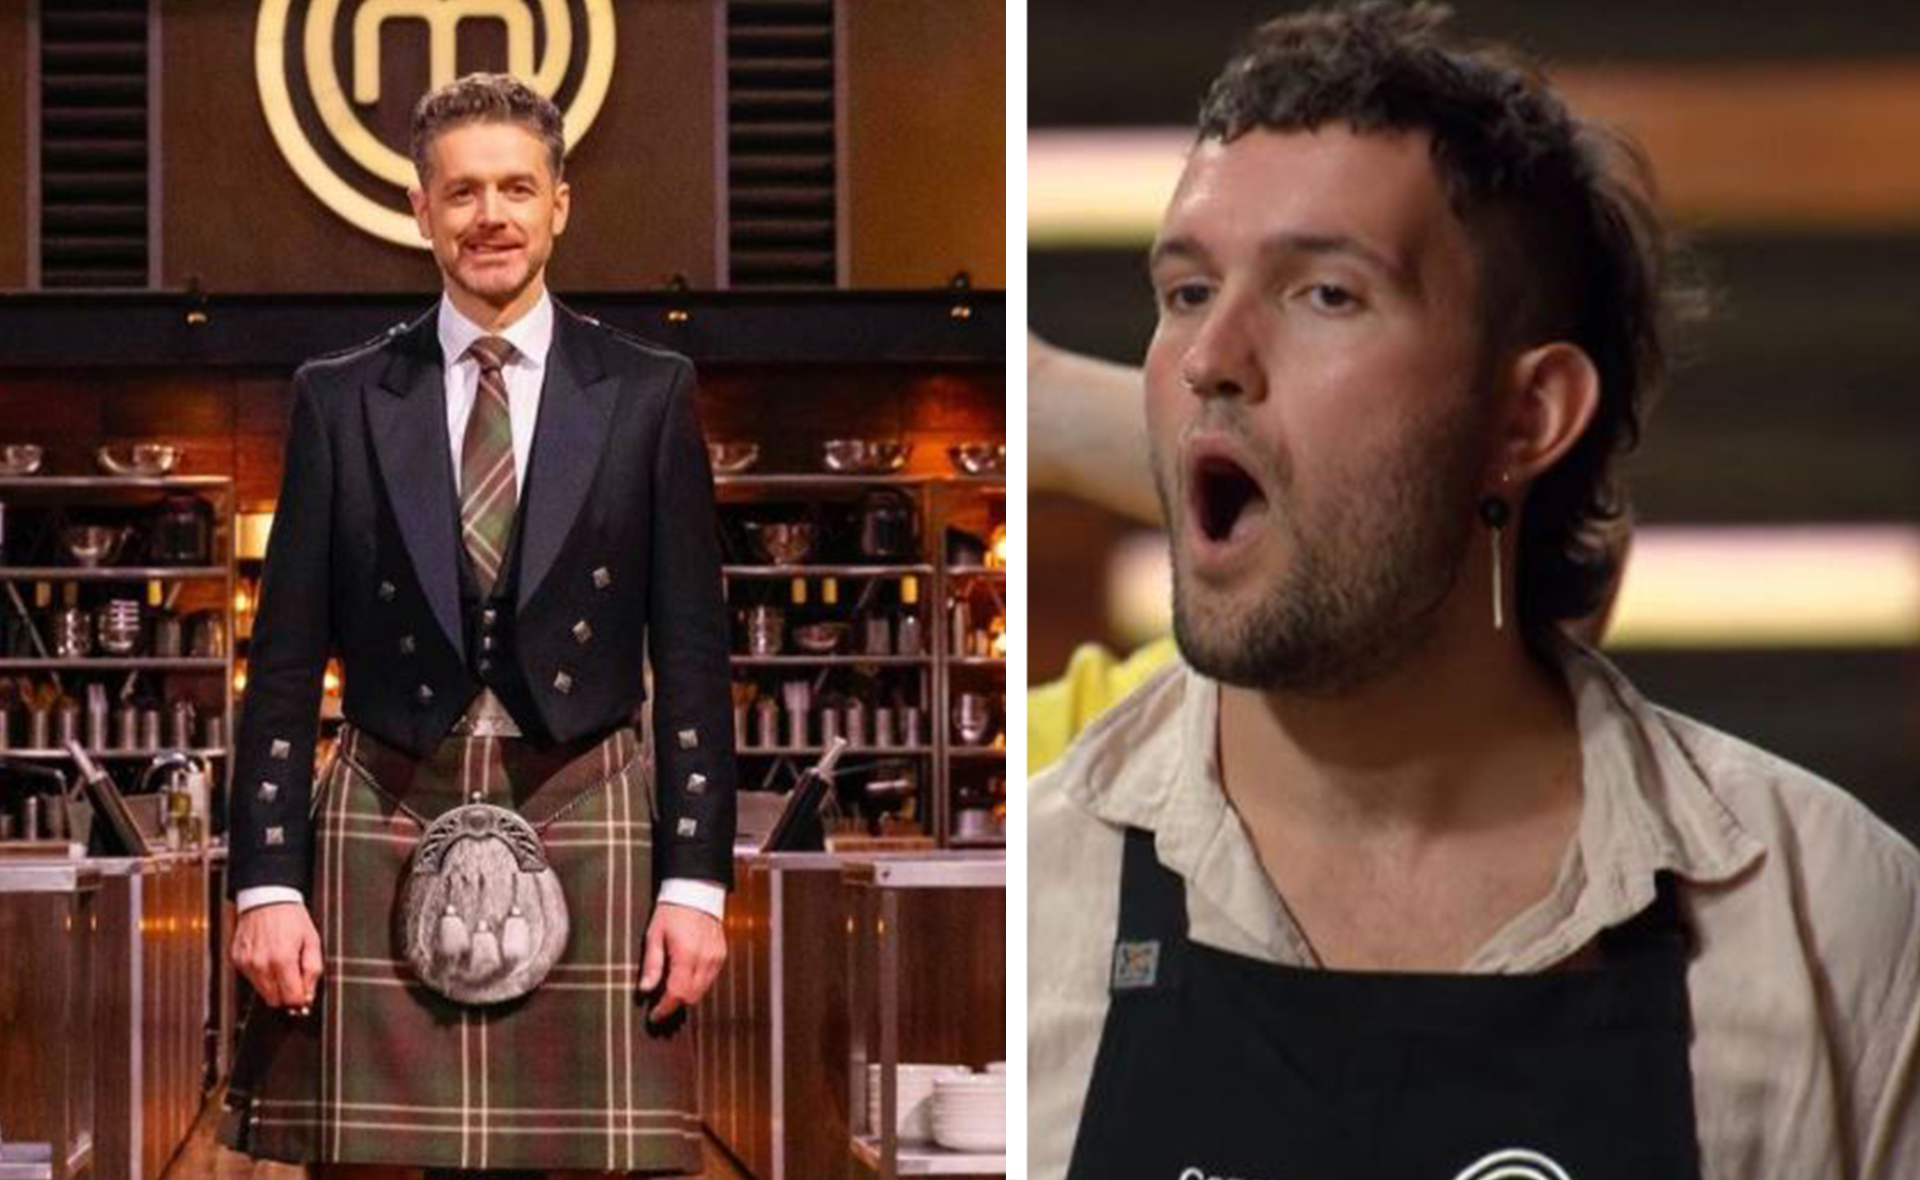 EXCLUSIVE: Why eliminated MasterChef contestant and fan favourite Conor Curran is eternally grateful for the guidance of “intense” Jock Zonfrillo